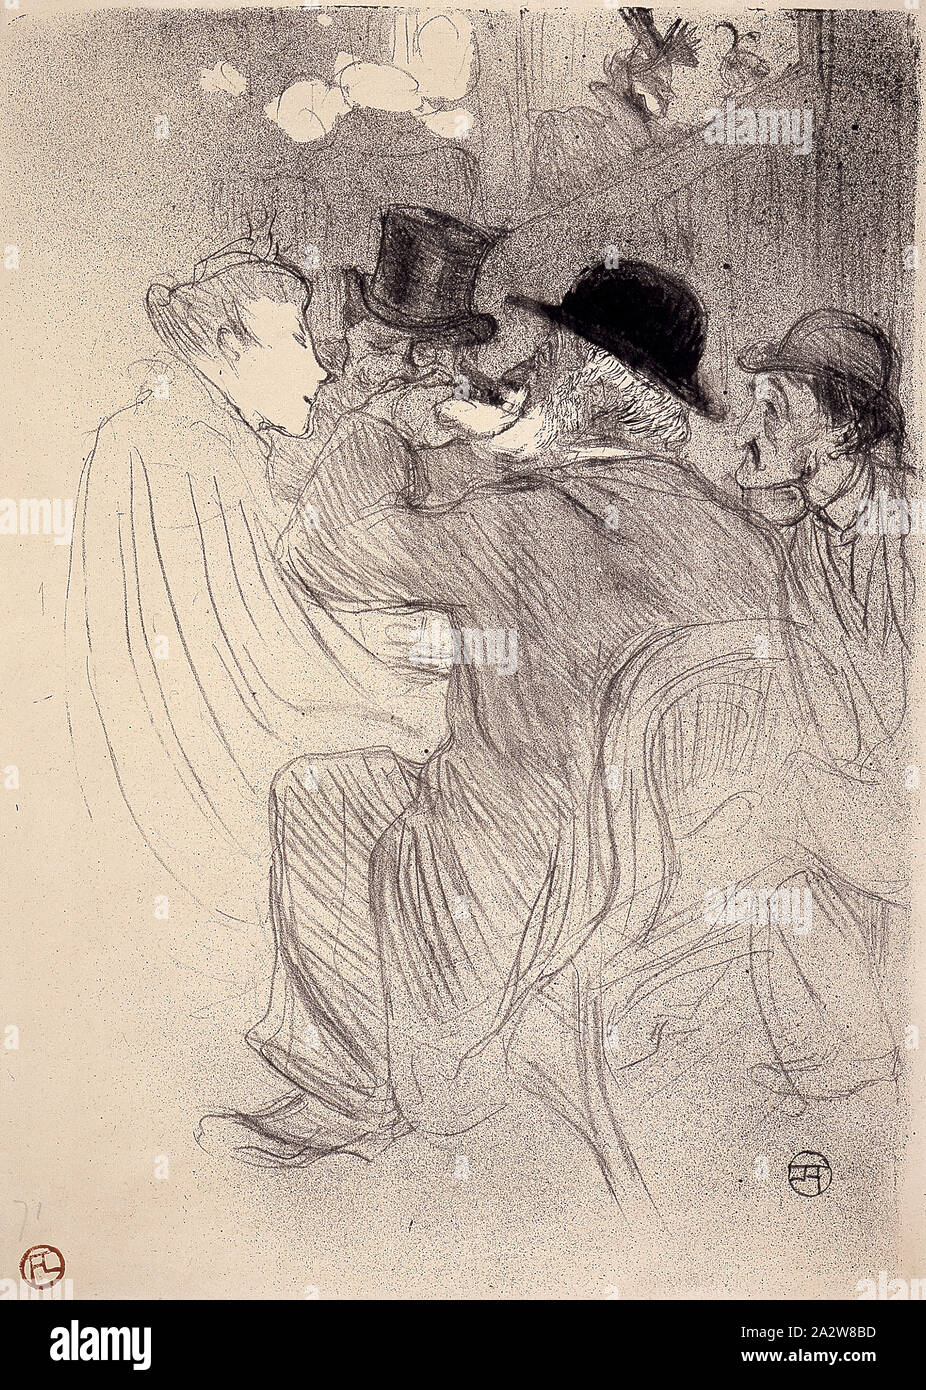 Au Moulin Rouge: Un Rude! Un Vrai Rude! (At the Moulin Rouge - A Rude! a True Rude!), Henri de Toulouse-Lautrec (French, 1864-1901), Edward Ancourt, Printer (French), 1893, ink on paper, lithograph, 14-1/4 x 10 in. (image) 14-3/4 x 10-3/4 in. (sheet), inscribed in pencil, L.L.: 71, stamped in red, L.L.: HTL (Lugt 1338 Stock Photo